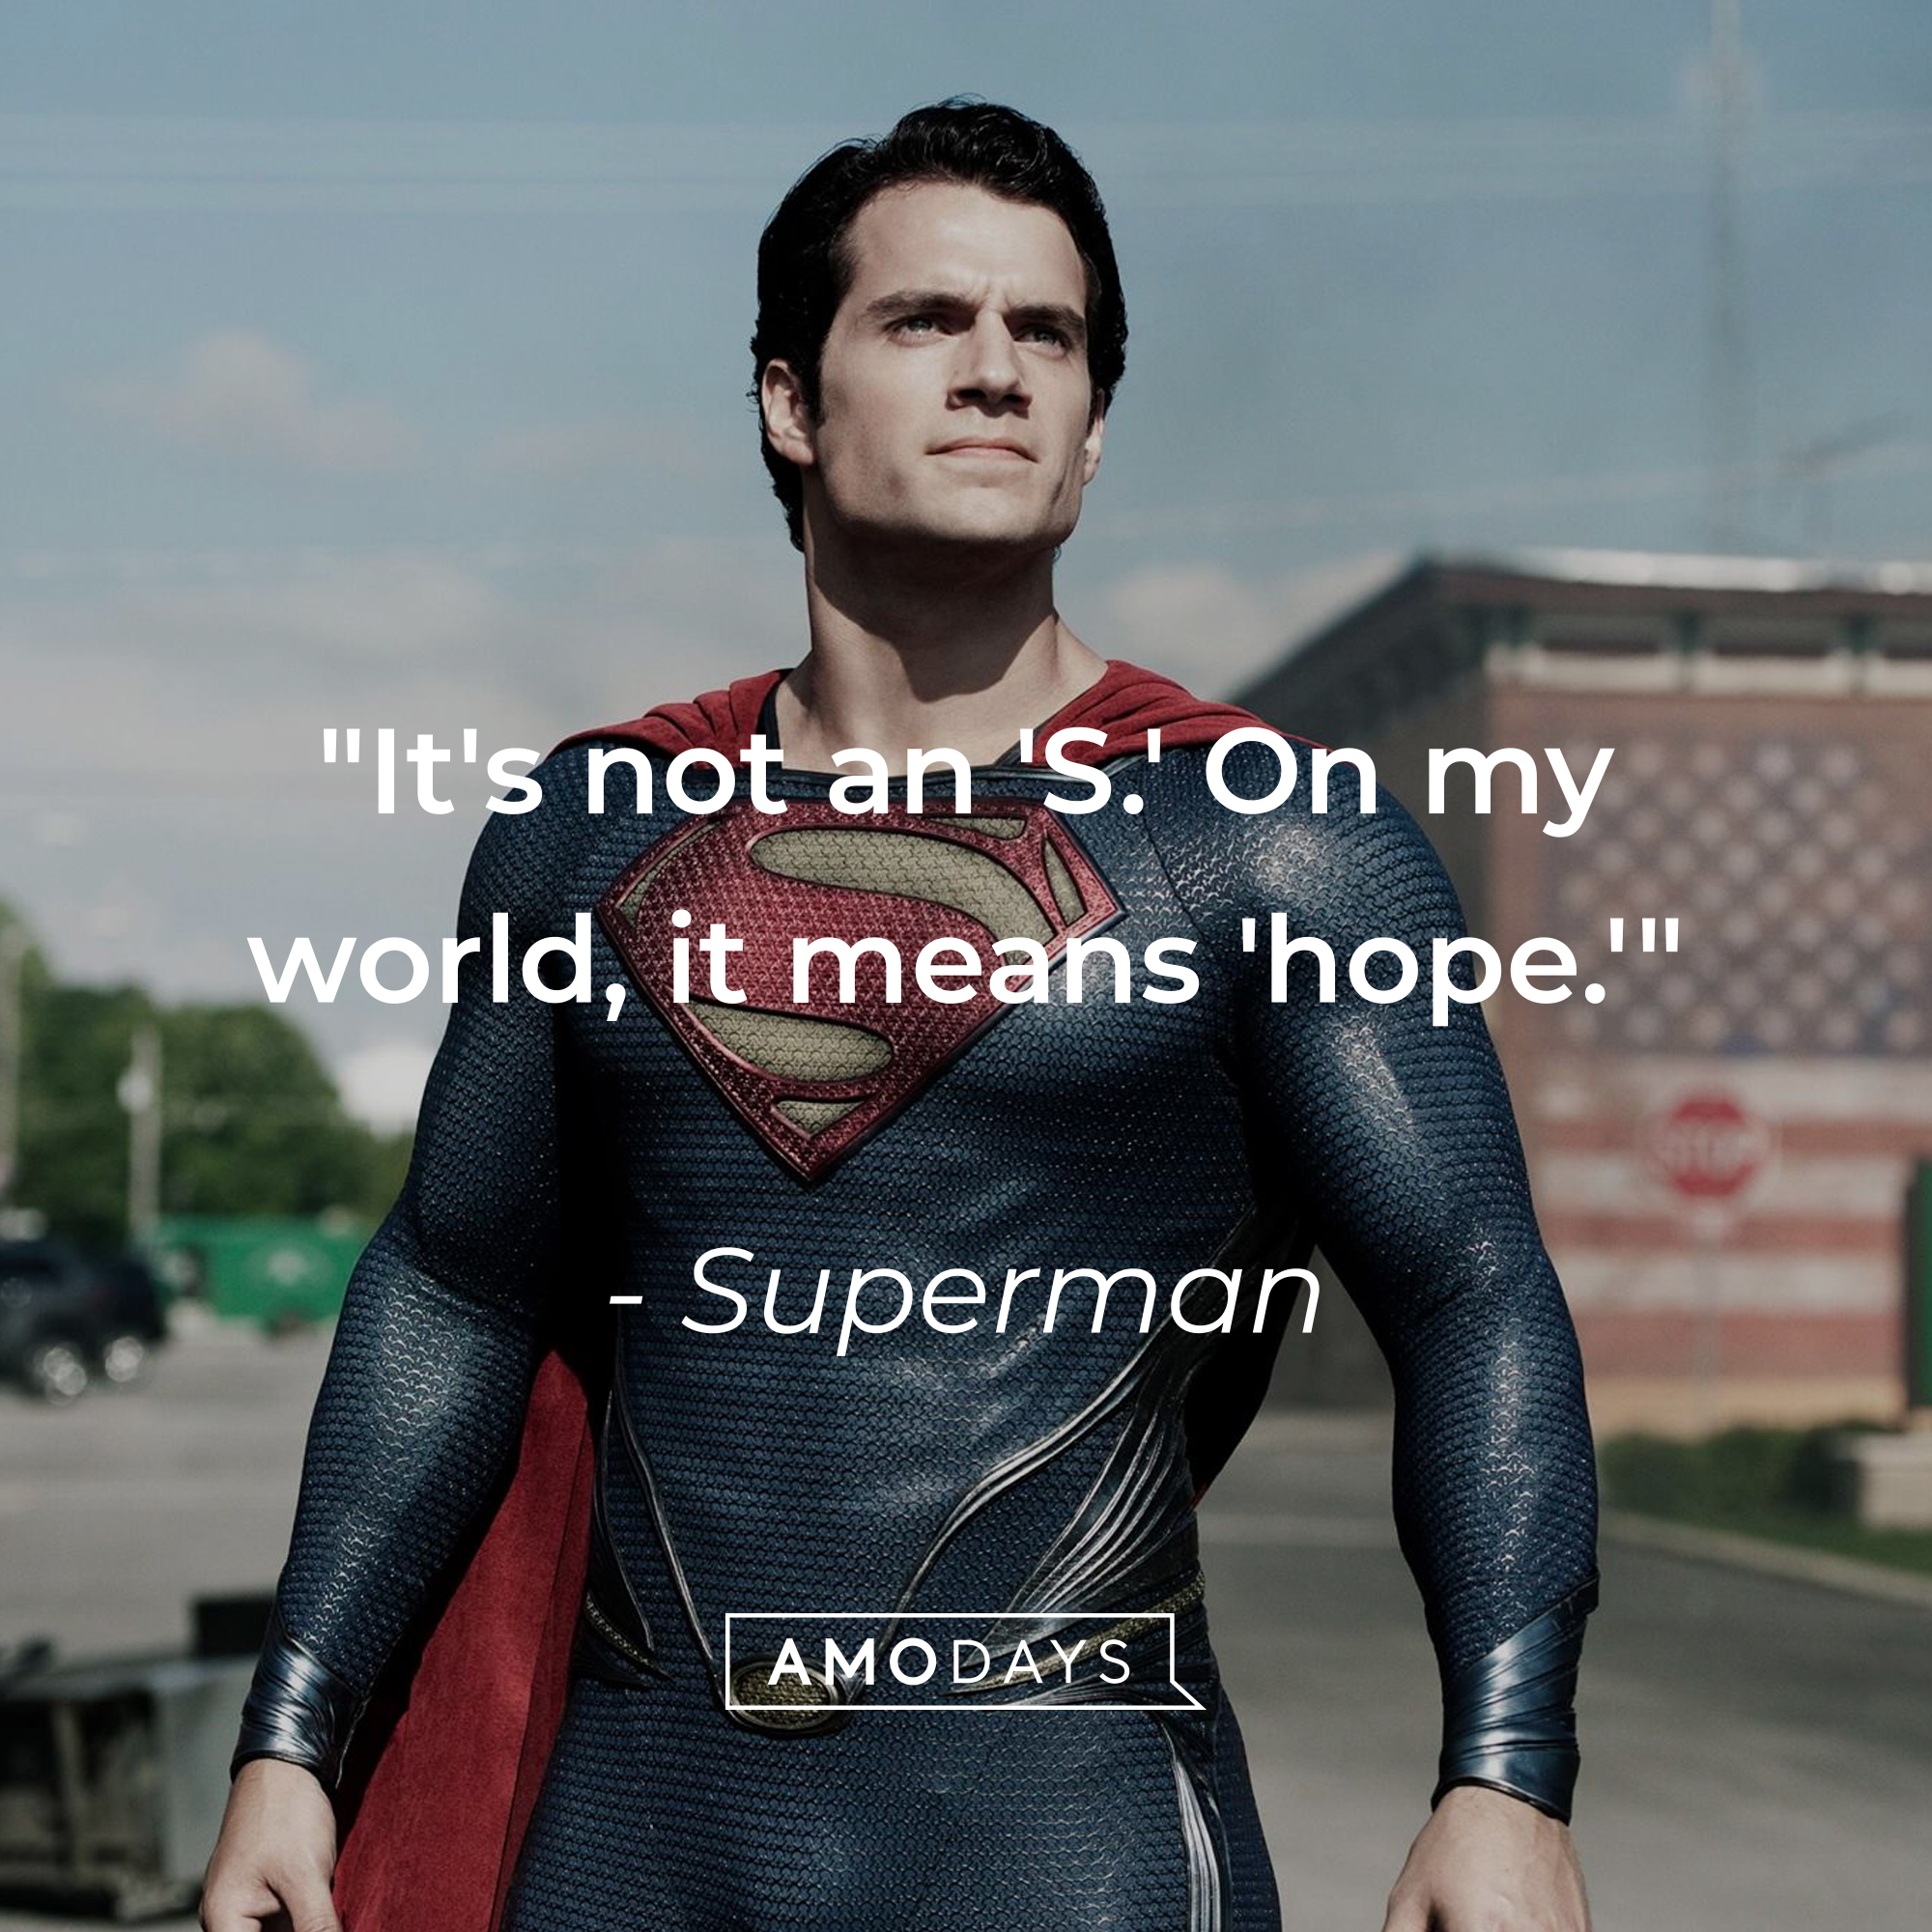 Superman’s quote: "It's not an 'S.' On my world, it means 'hope.'" | Source: Facebook/manofsteel